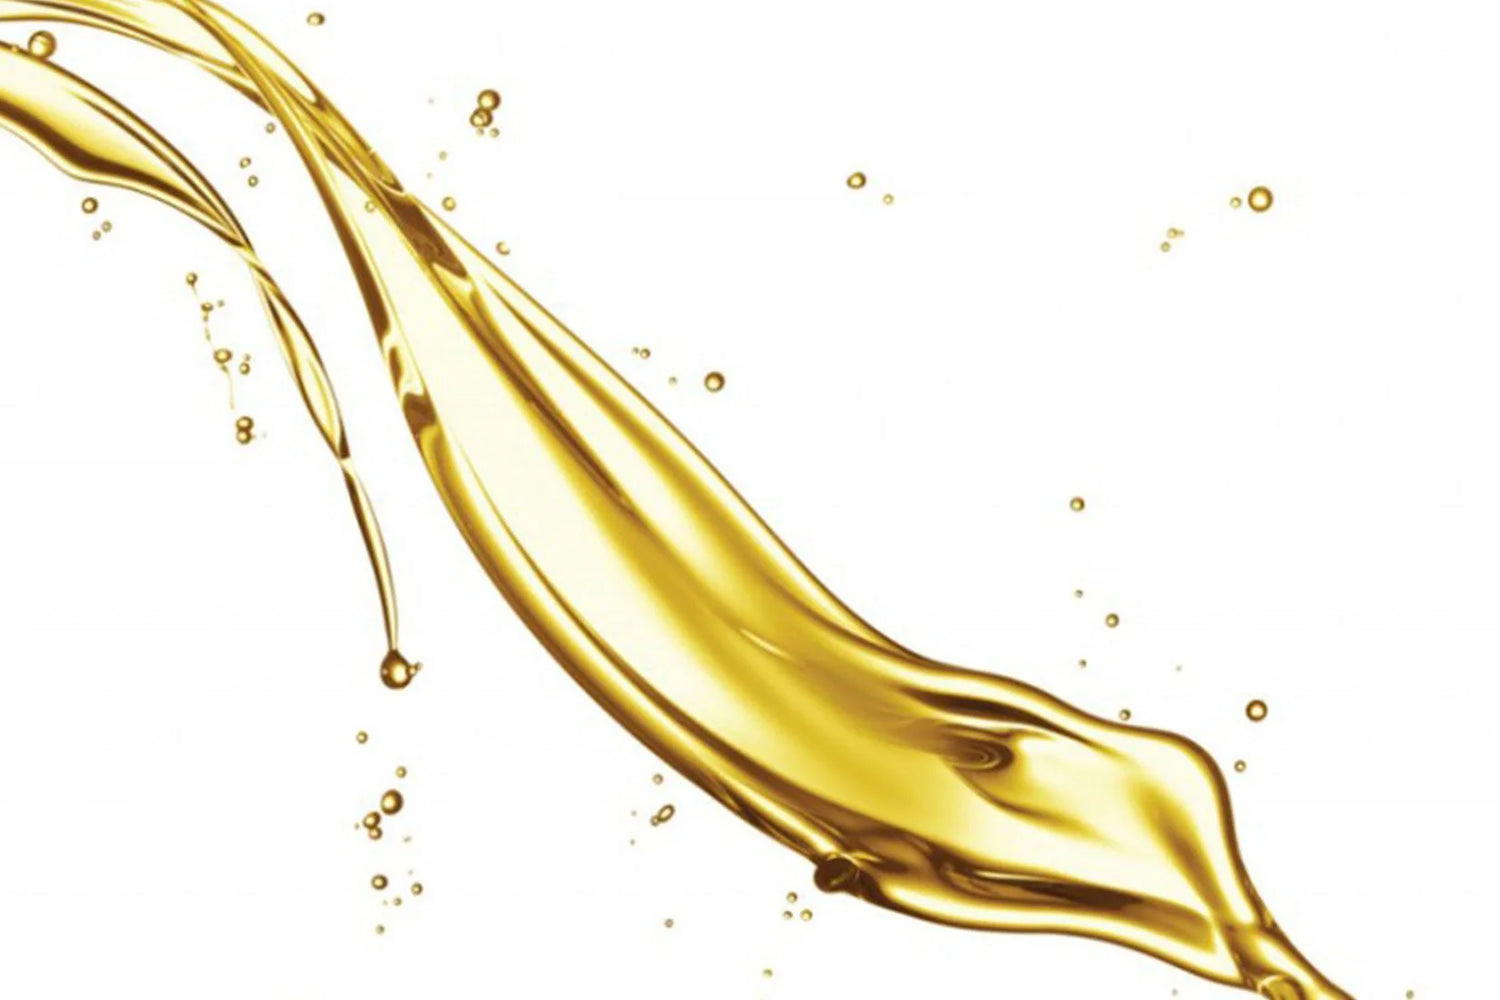 Is Mineral Oil Bad For Your Skin?